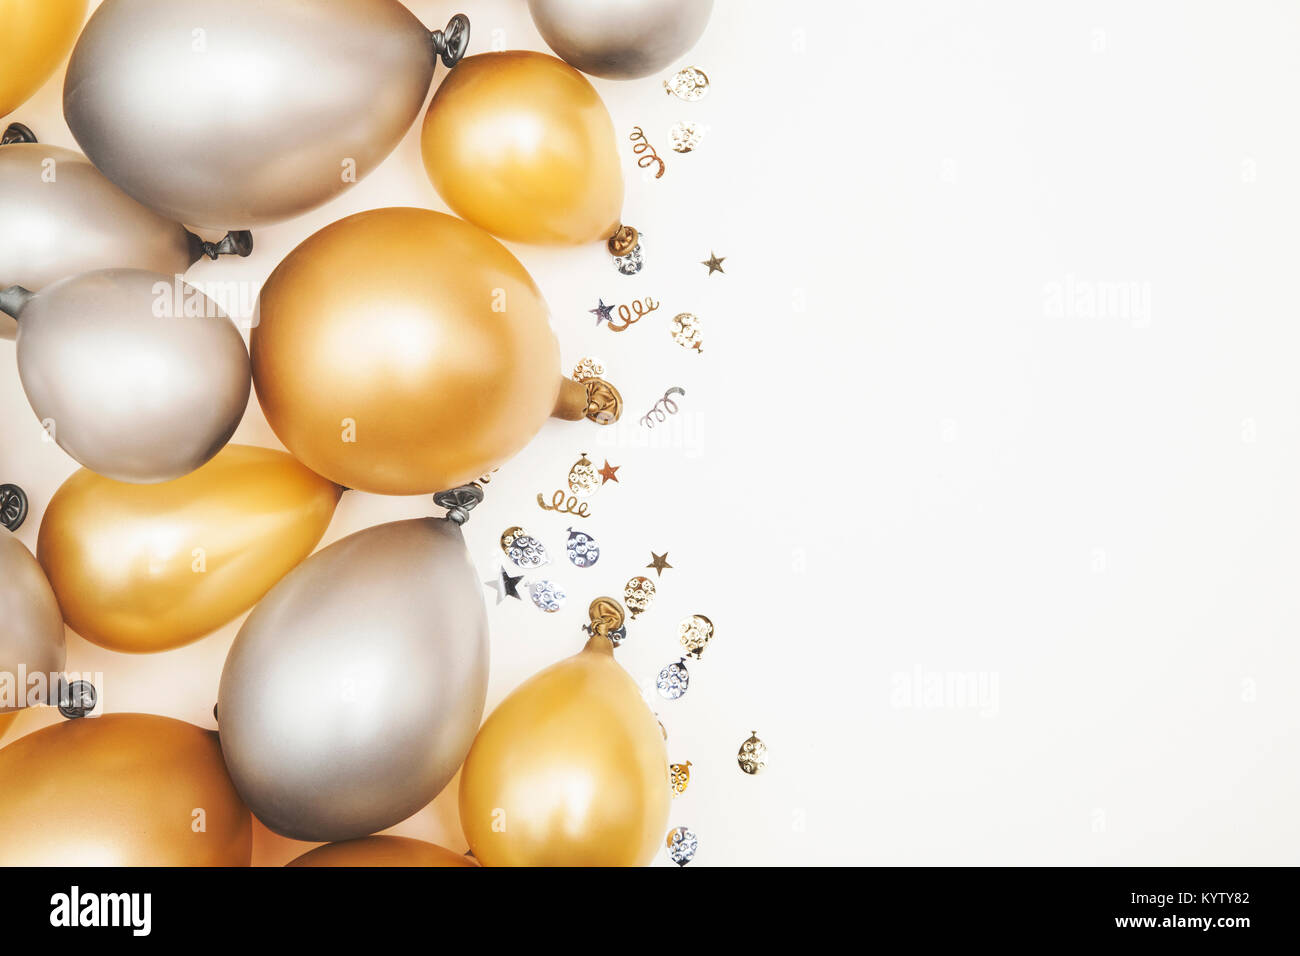 Gold and silver party celebration balloons on a plain background Stock  Photo - Alamy